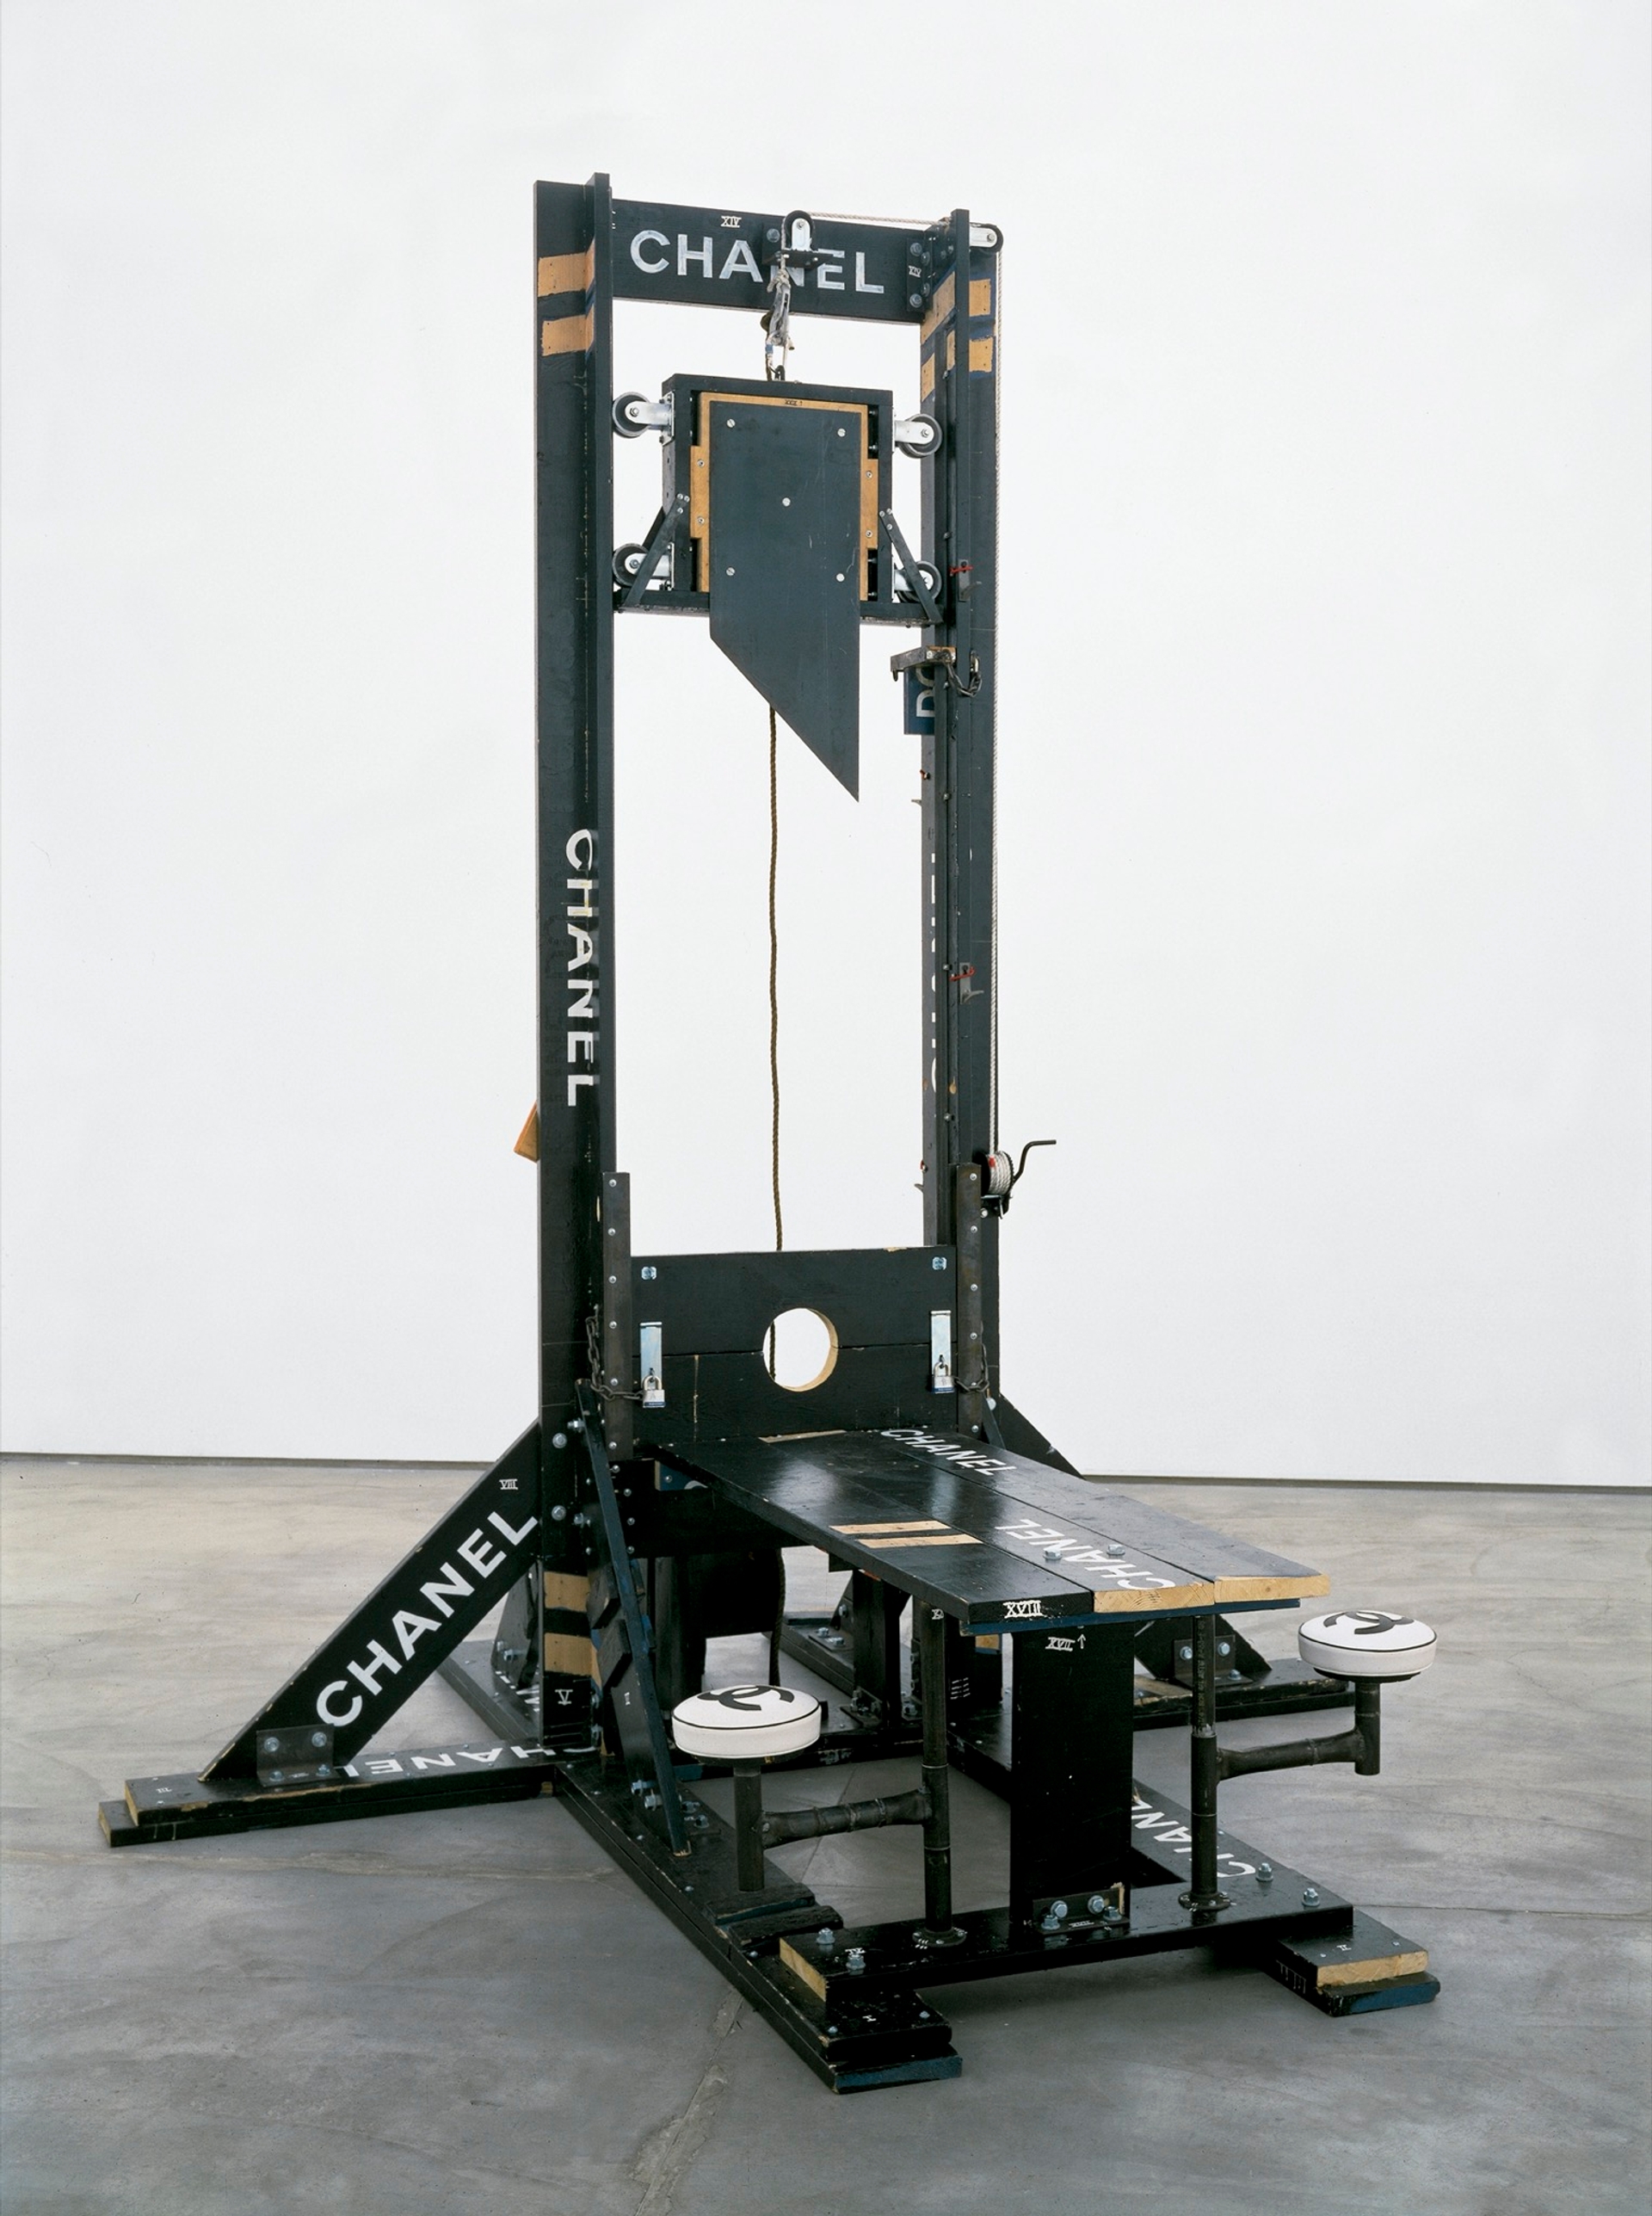 Chanel Guillotine (Breakfast Nook), 1998. “I’ve always admired and appreciated Chanel but I couldn’t really rock it,” Sachs said in a 2016 interview. “I started to try and use that brand in my art and bring it into my life as a way of participating; I put Chanel logos on things when I wanted to make them more powerful and give them more authority.” Photo courtesy of Galerie Thaddaeus Ropac.